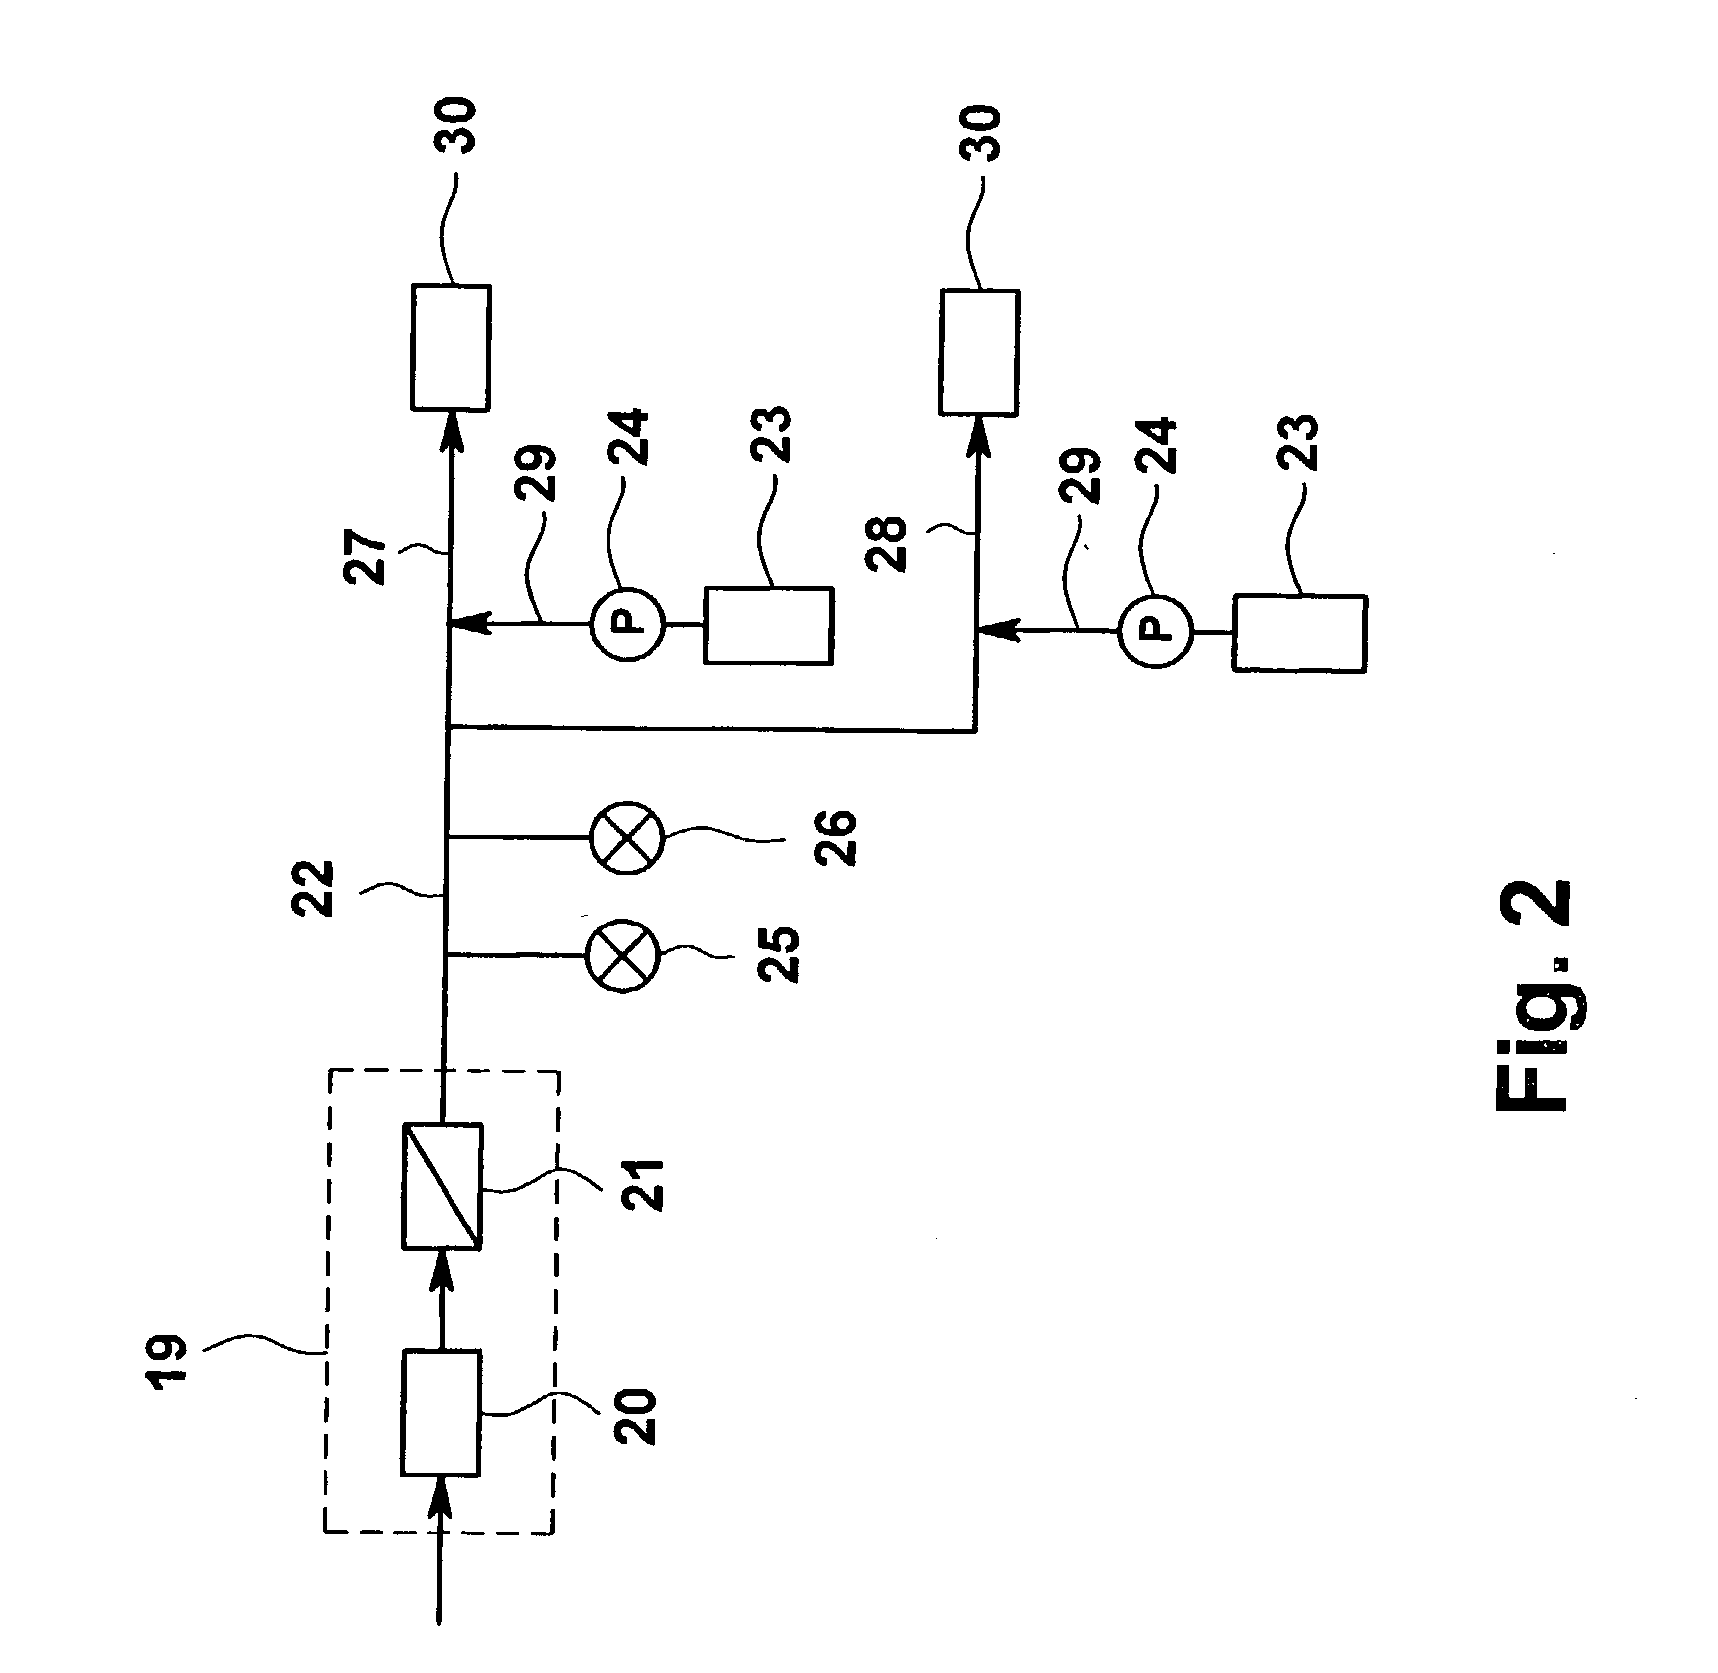 Hydrogen-dissolved water production apparatus